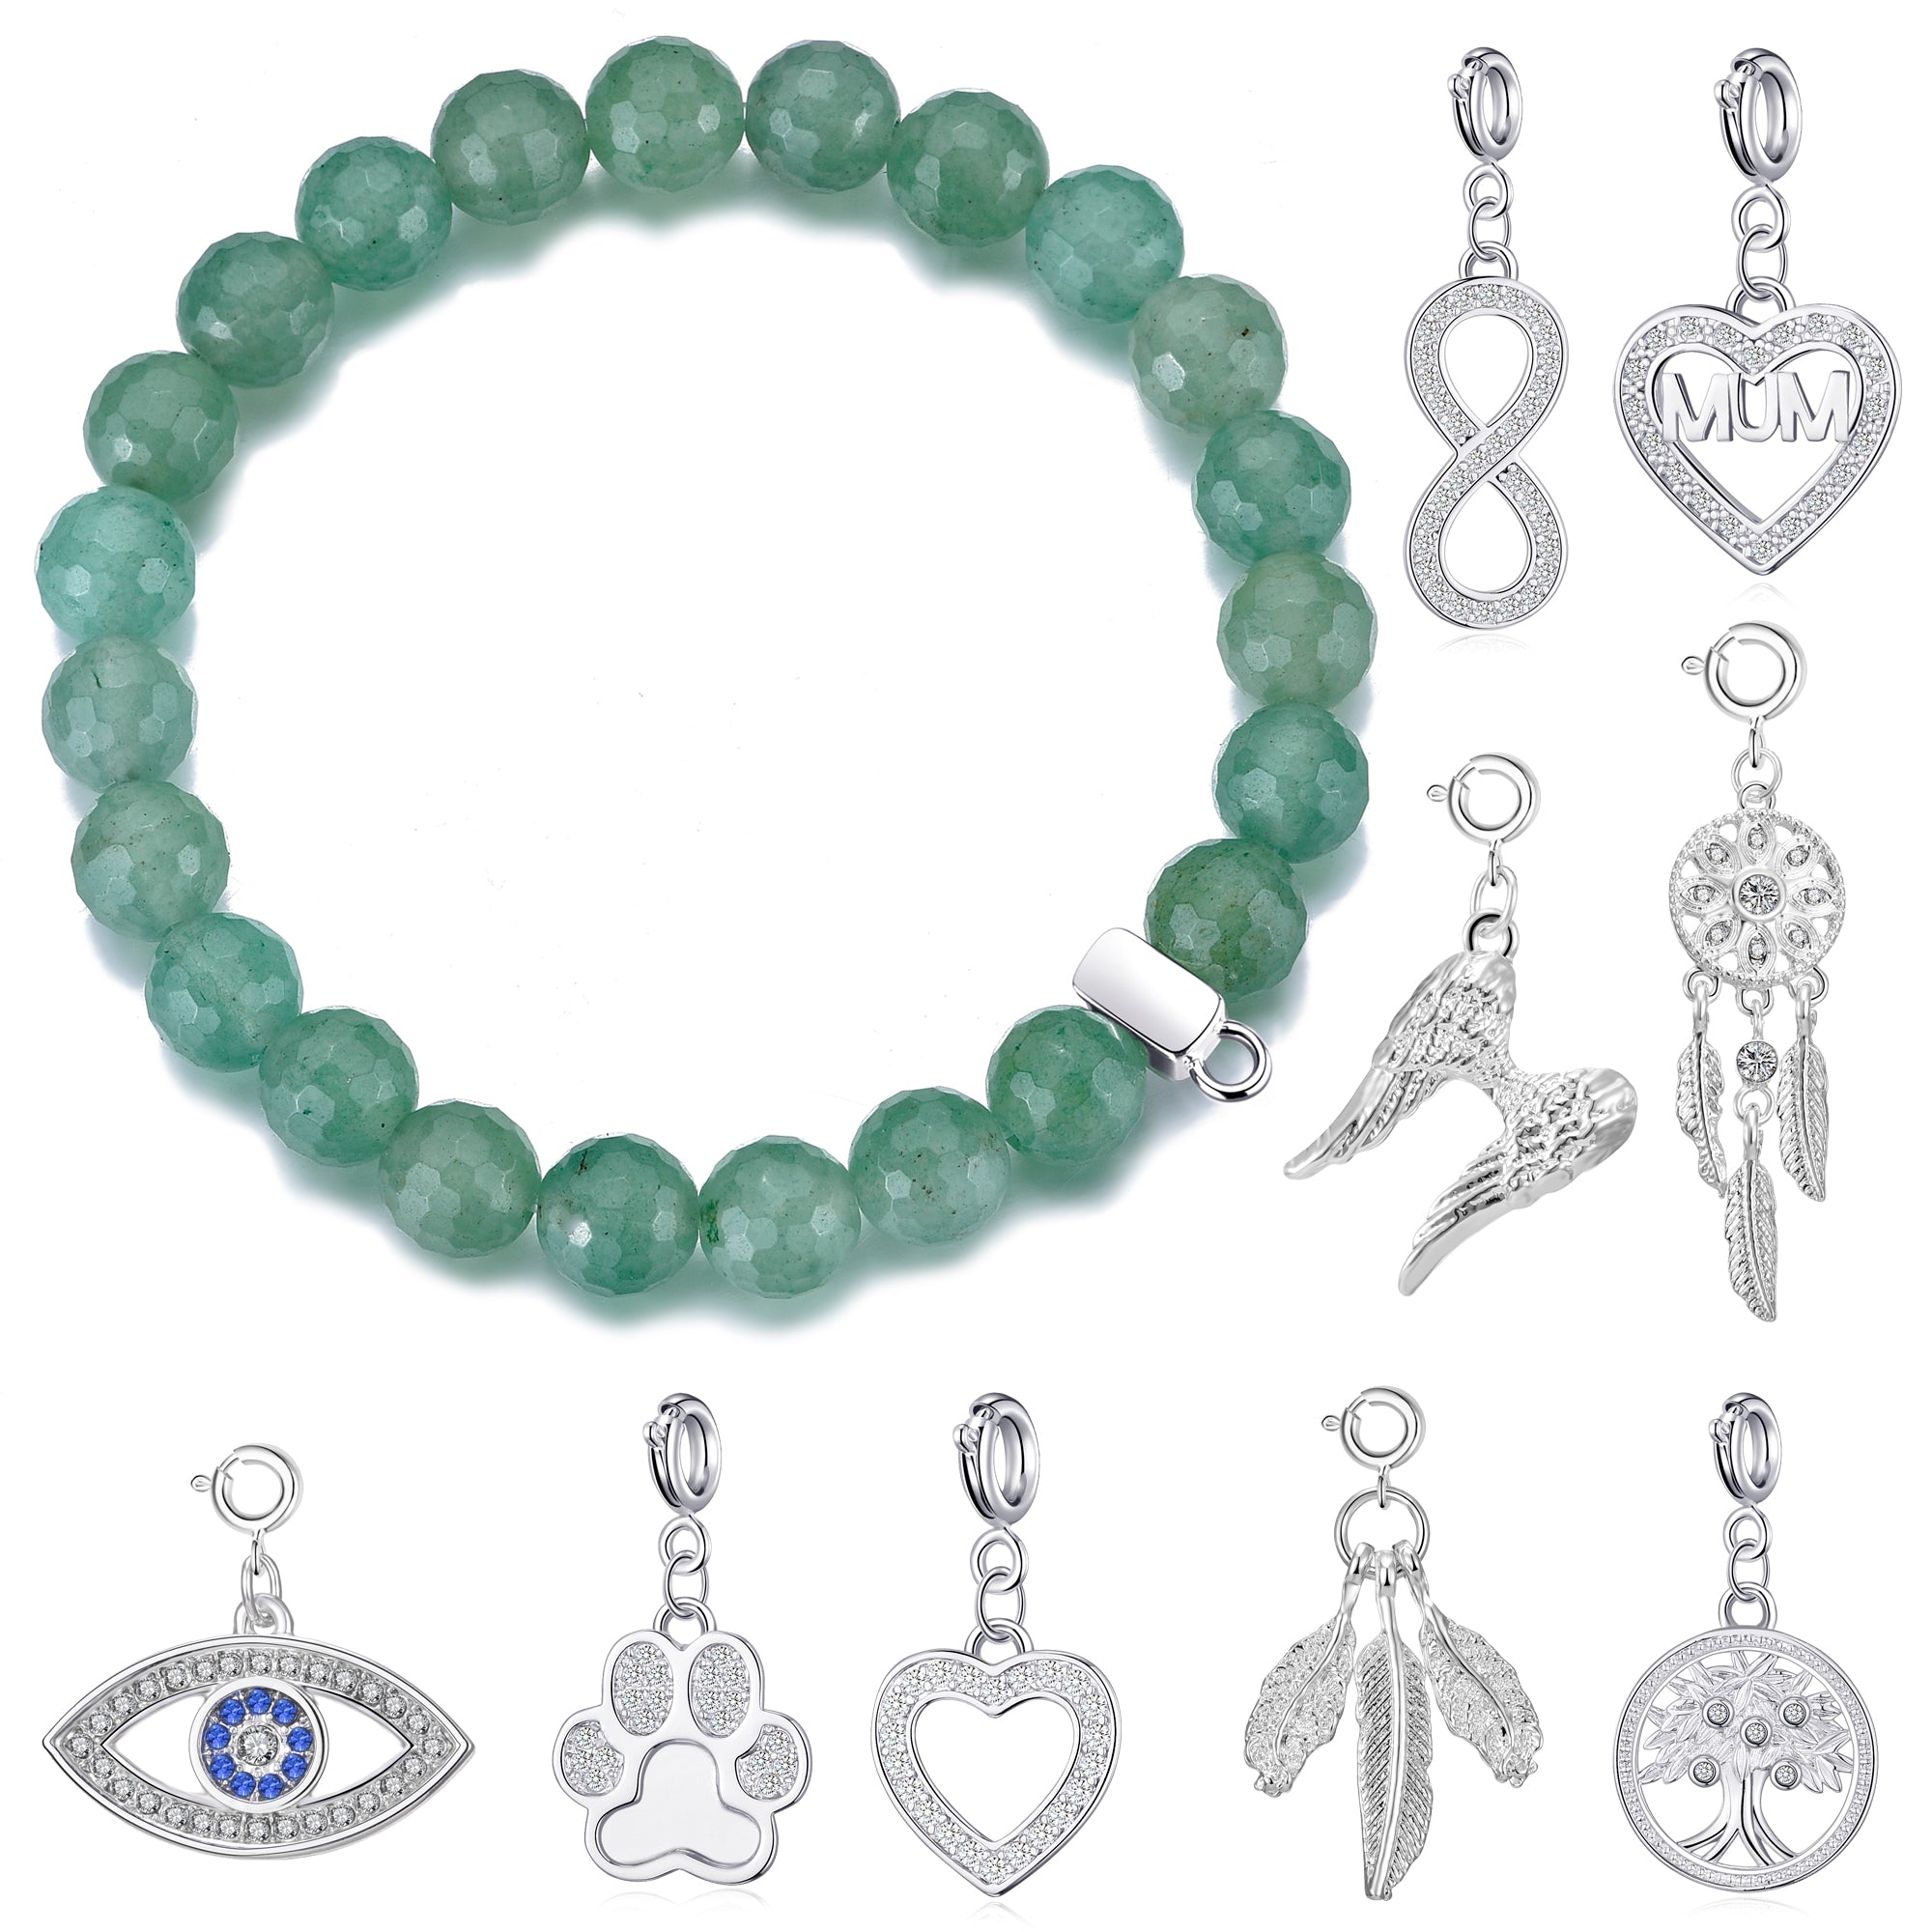 Faceted Green Aventurine Gemstone Stretch Bracelet with Charm Created with Zircondia® Crystals by Philip Jones Jewellery